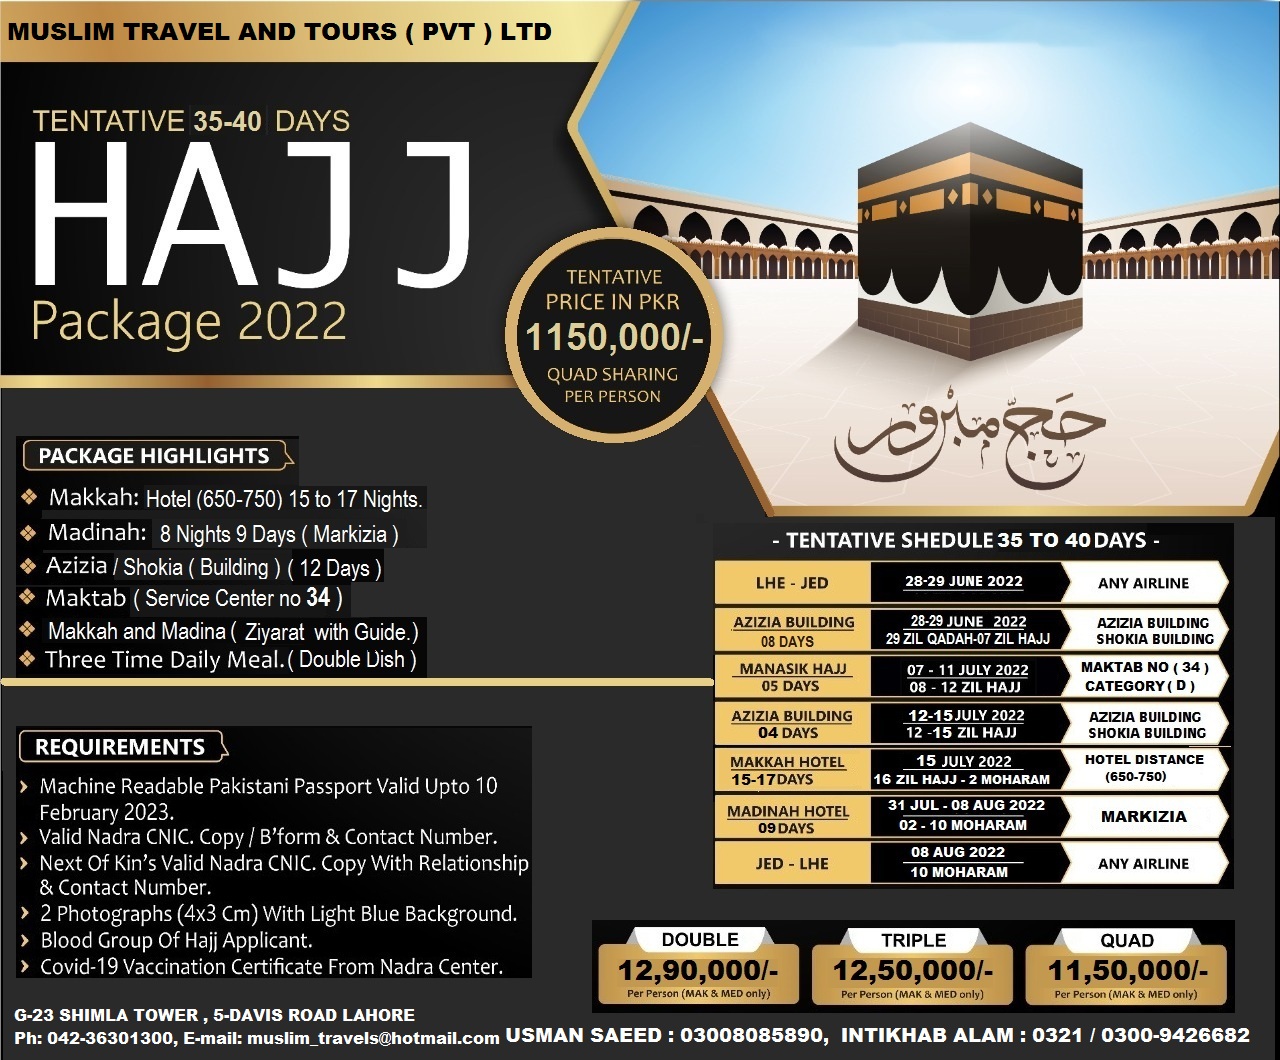 Hajj Package « MuslimTravels and Tours